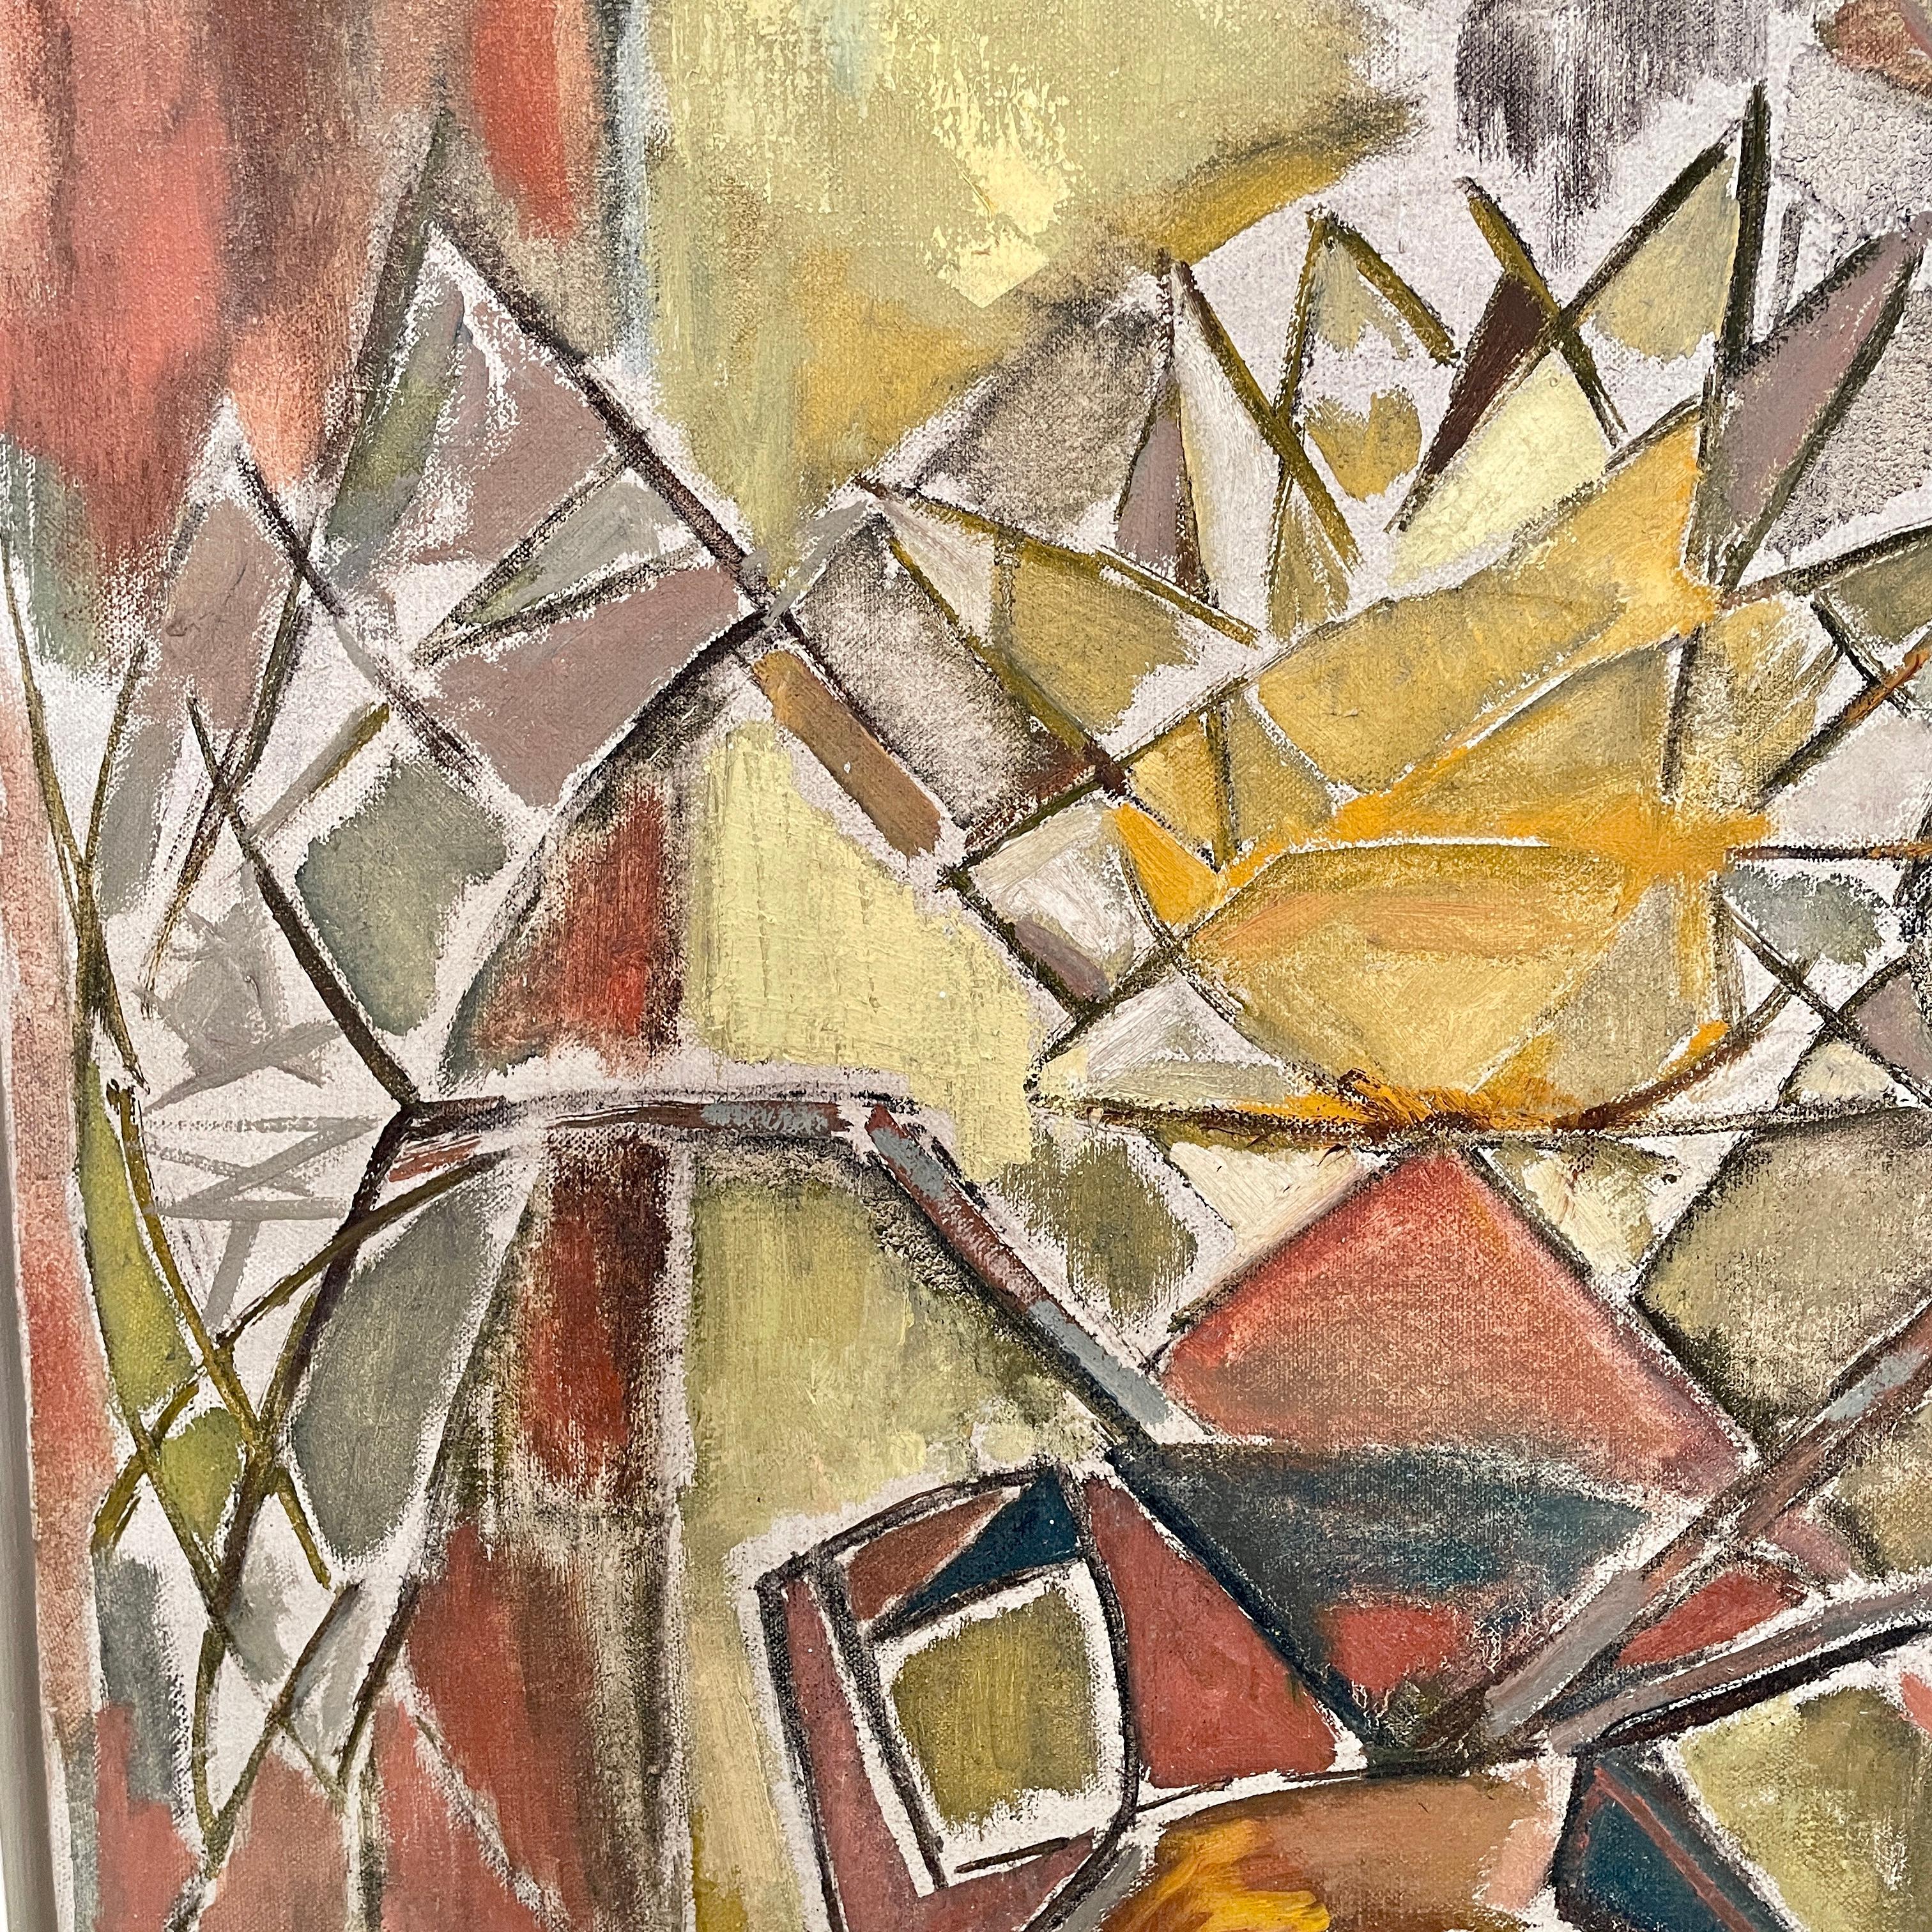 French Cubistic Still-Life Painting Acrylic on Canvas, Around 1910 4